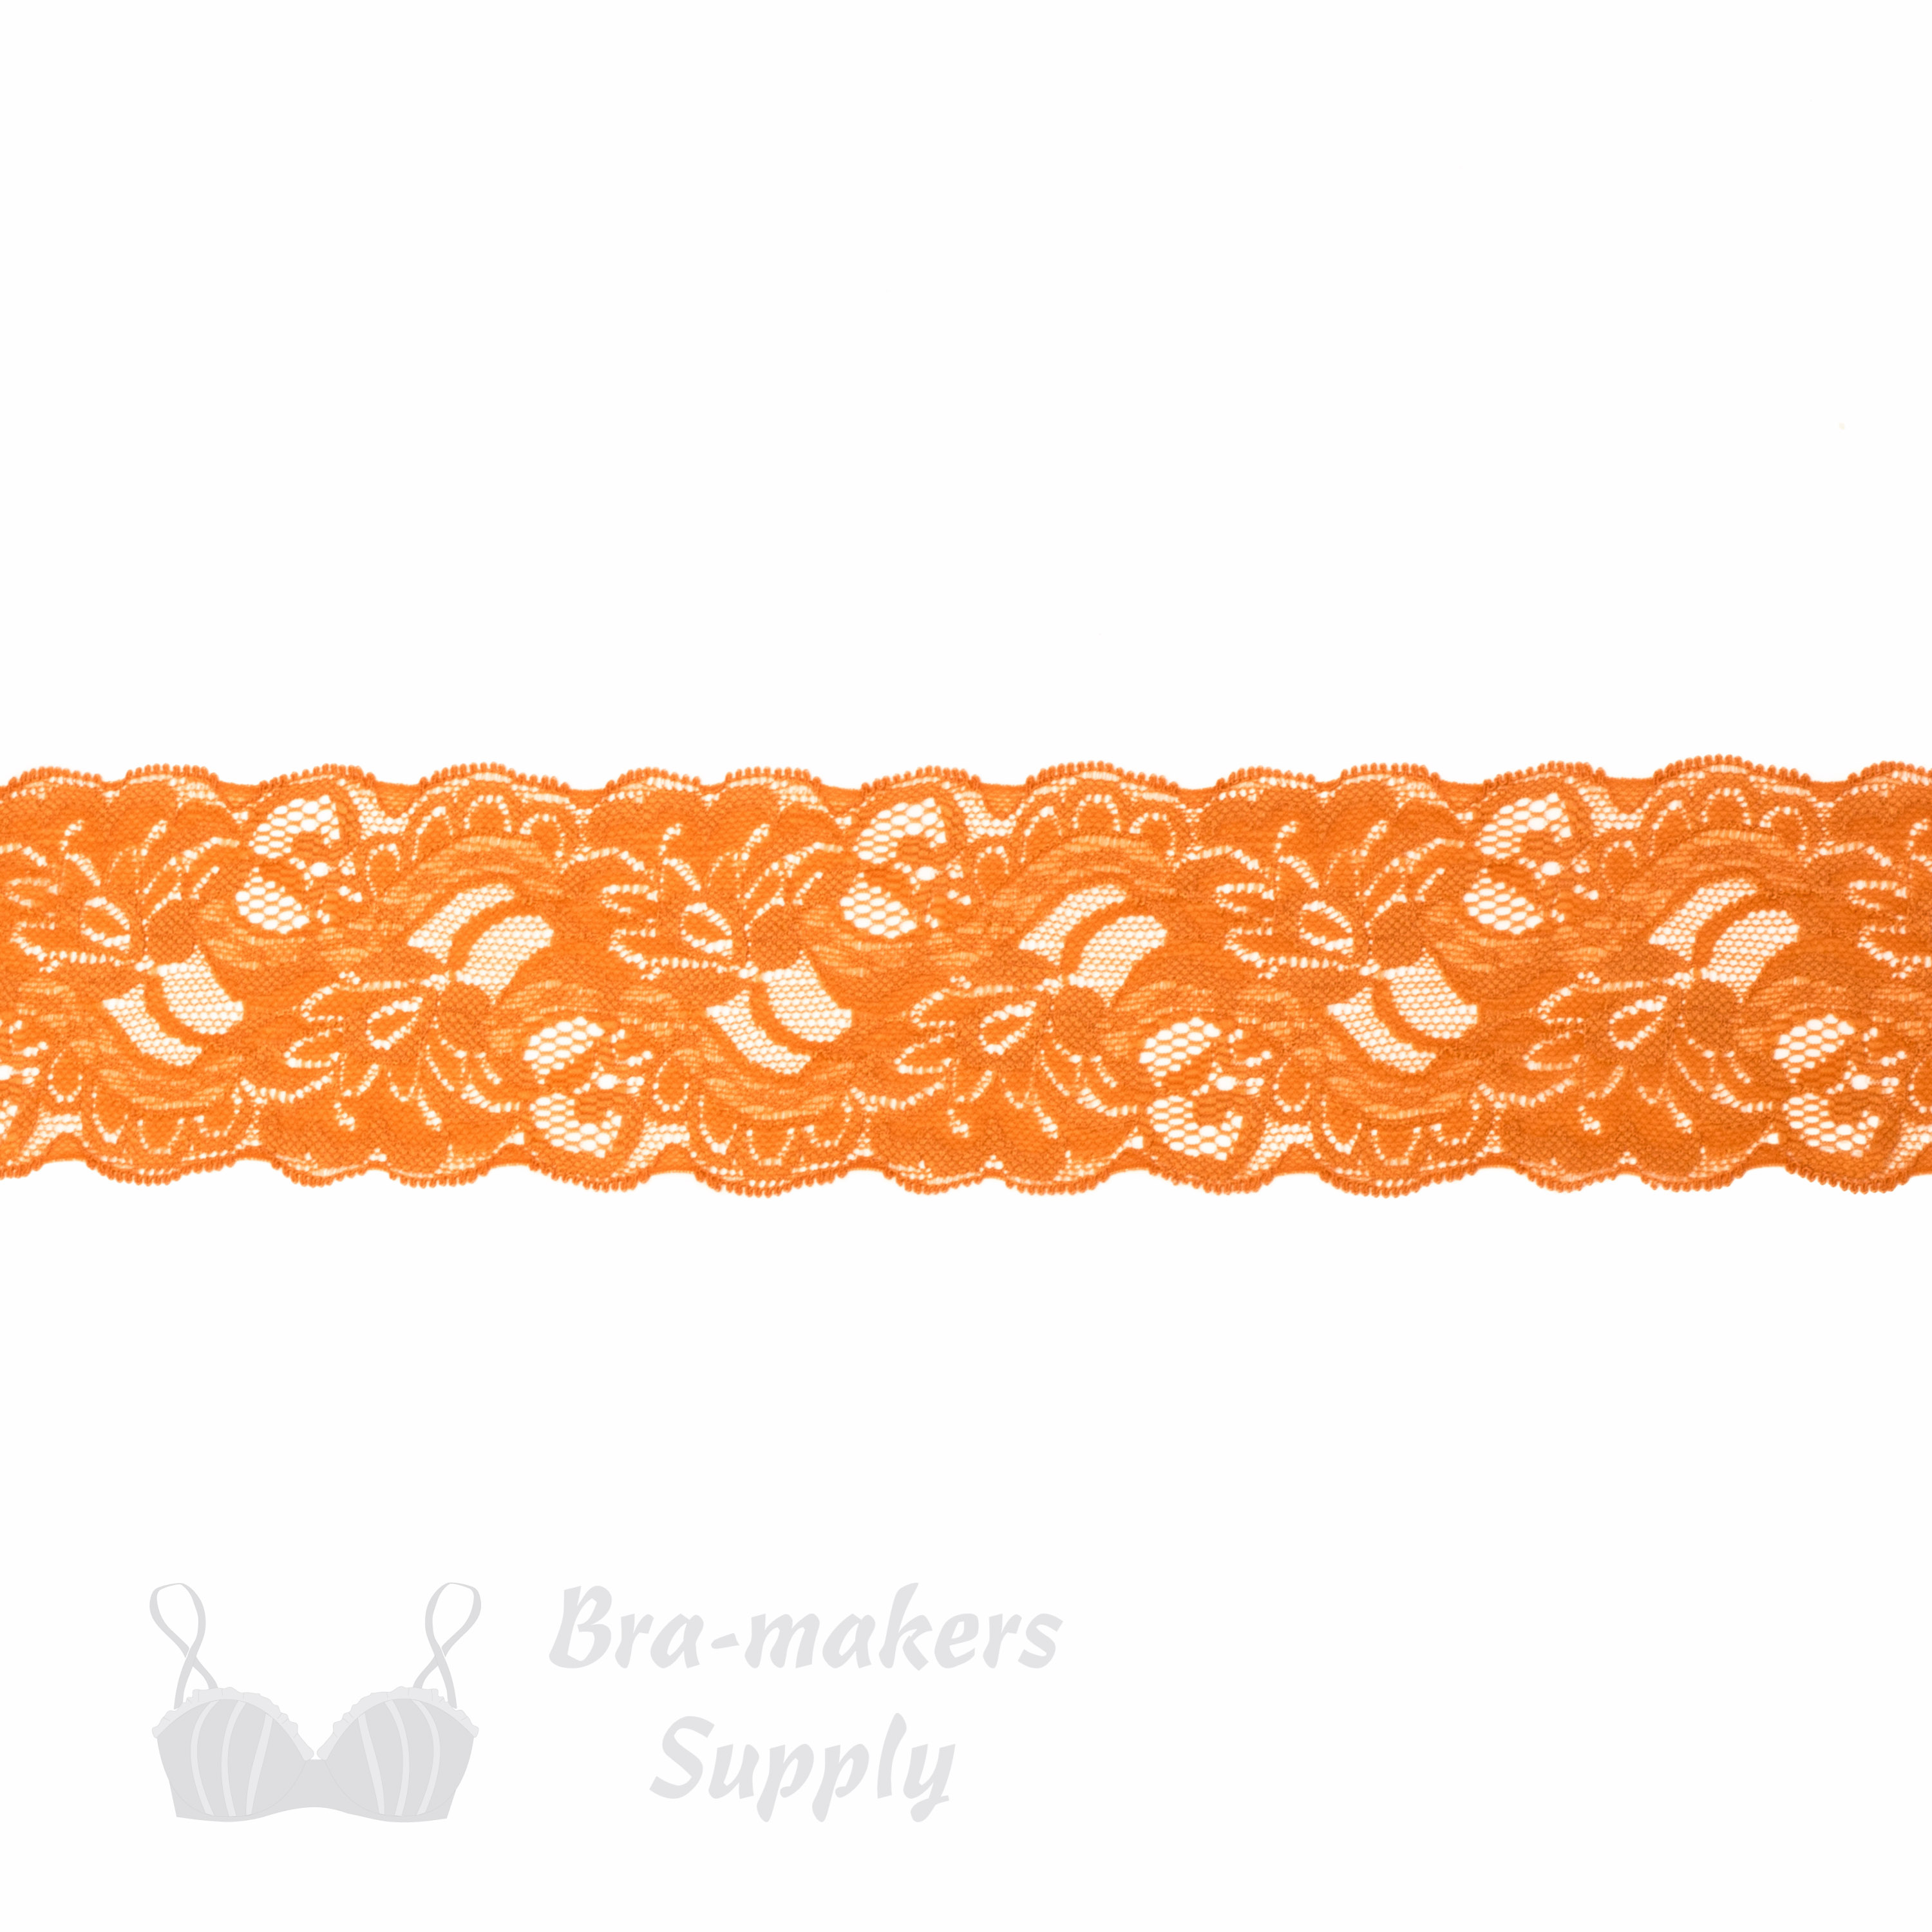 https://www.braandcorsetsupplies.com/wp-content/uploads/2016/08/stretch-laces-3-inch-7-cm-three-inch-orange-floral-stretch-lace-LS-30-270-from-Bra-Makers-Supply.jpg